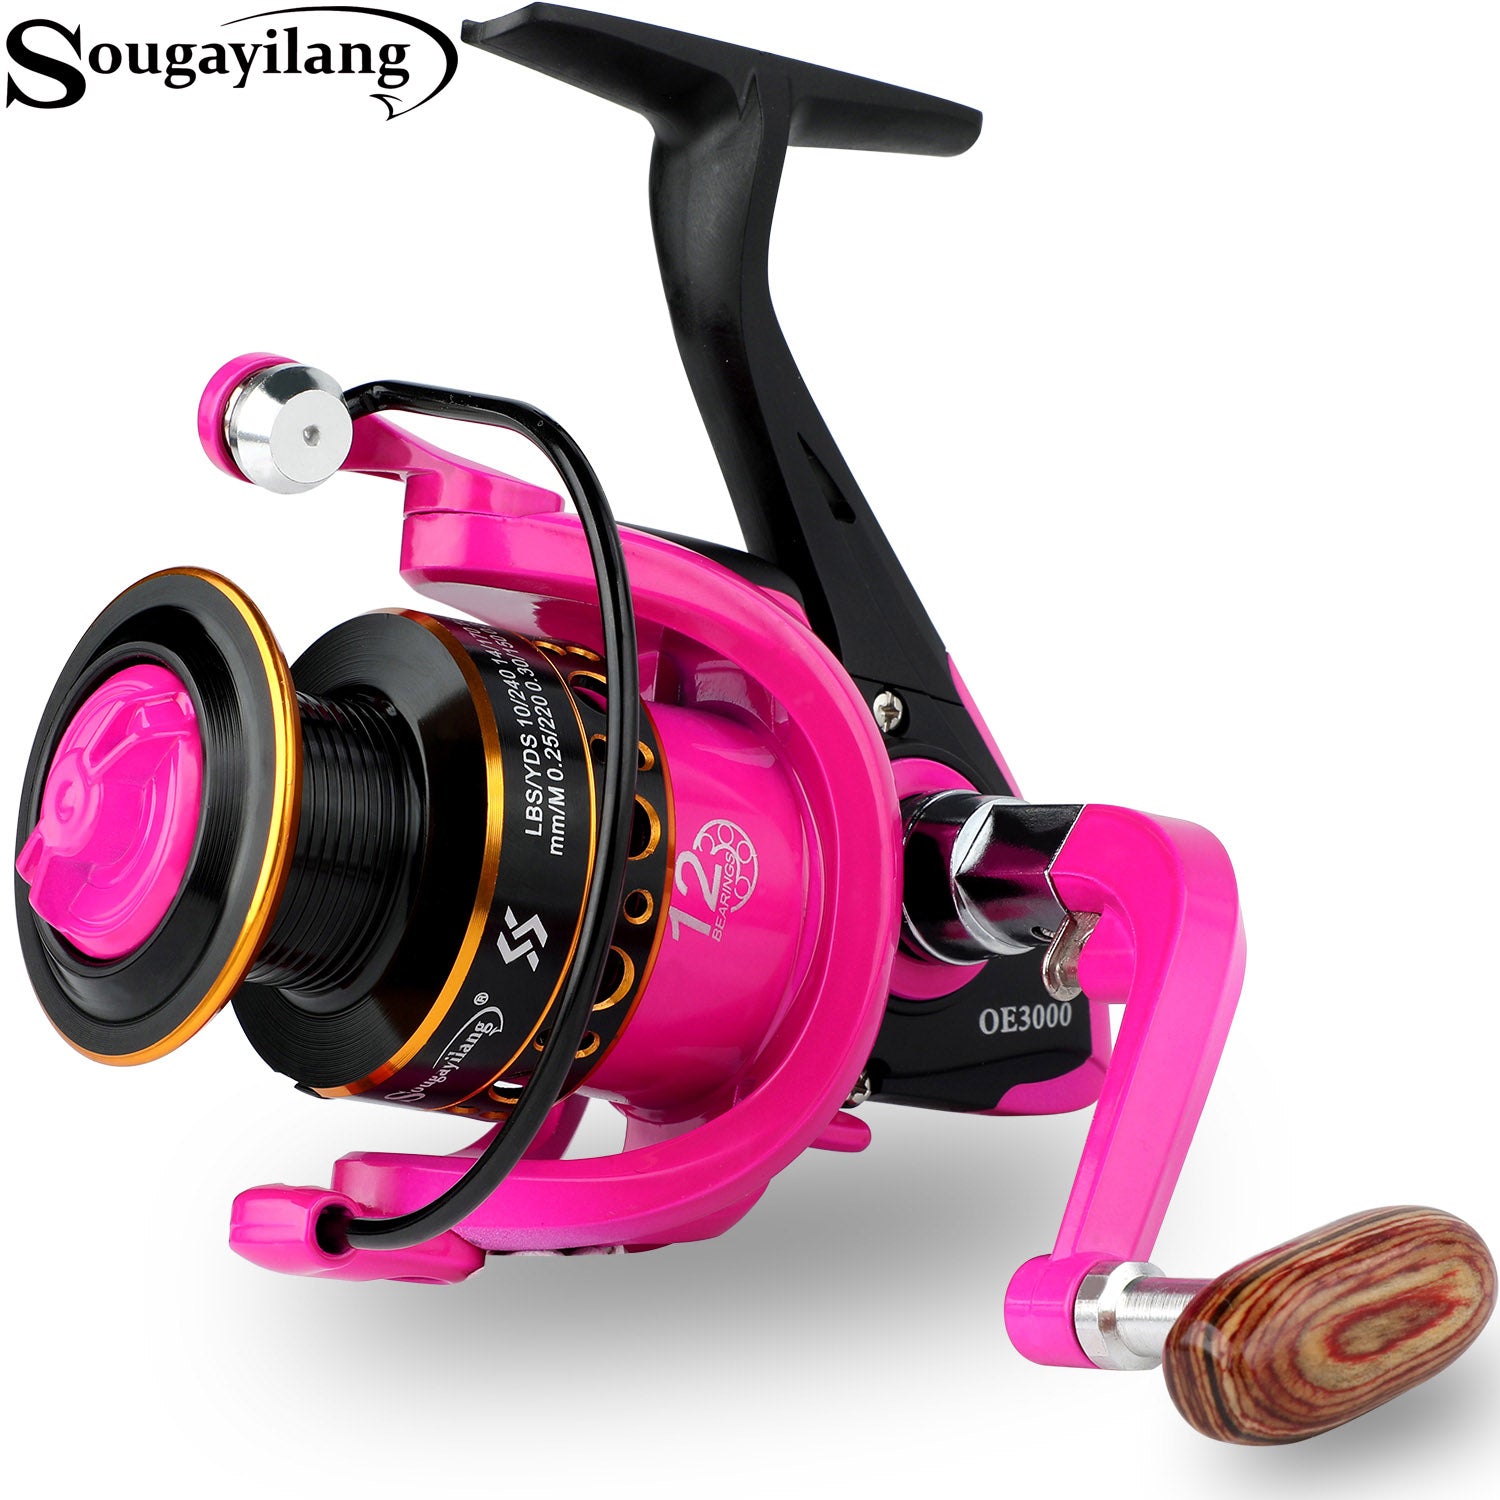  Fishing Reel, Foldable Swingarm Metal High Strength Pressure  Relief Button Carp Reel for River (GC1000) : Sports & Outdoors